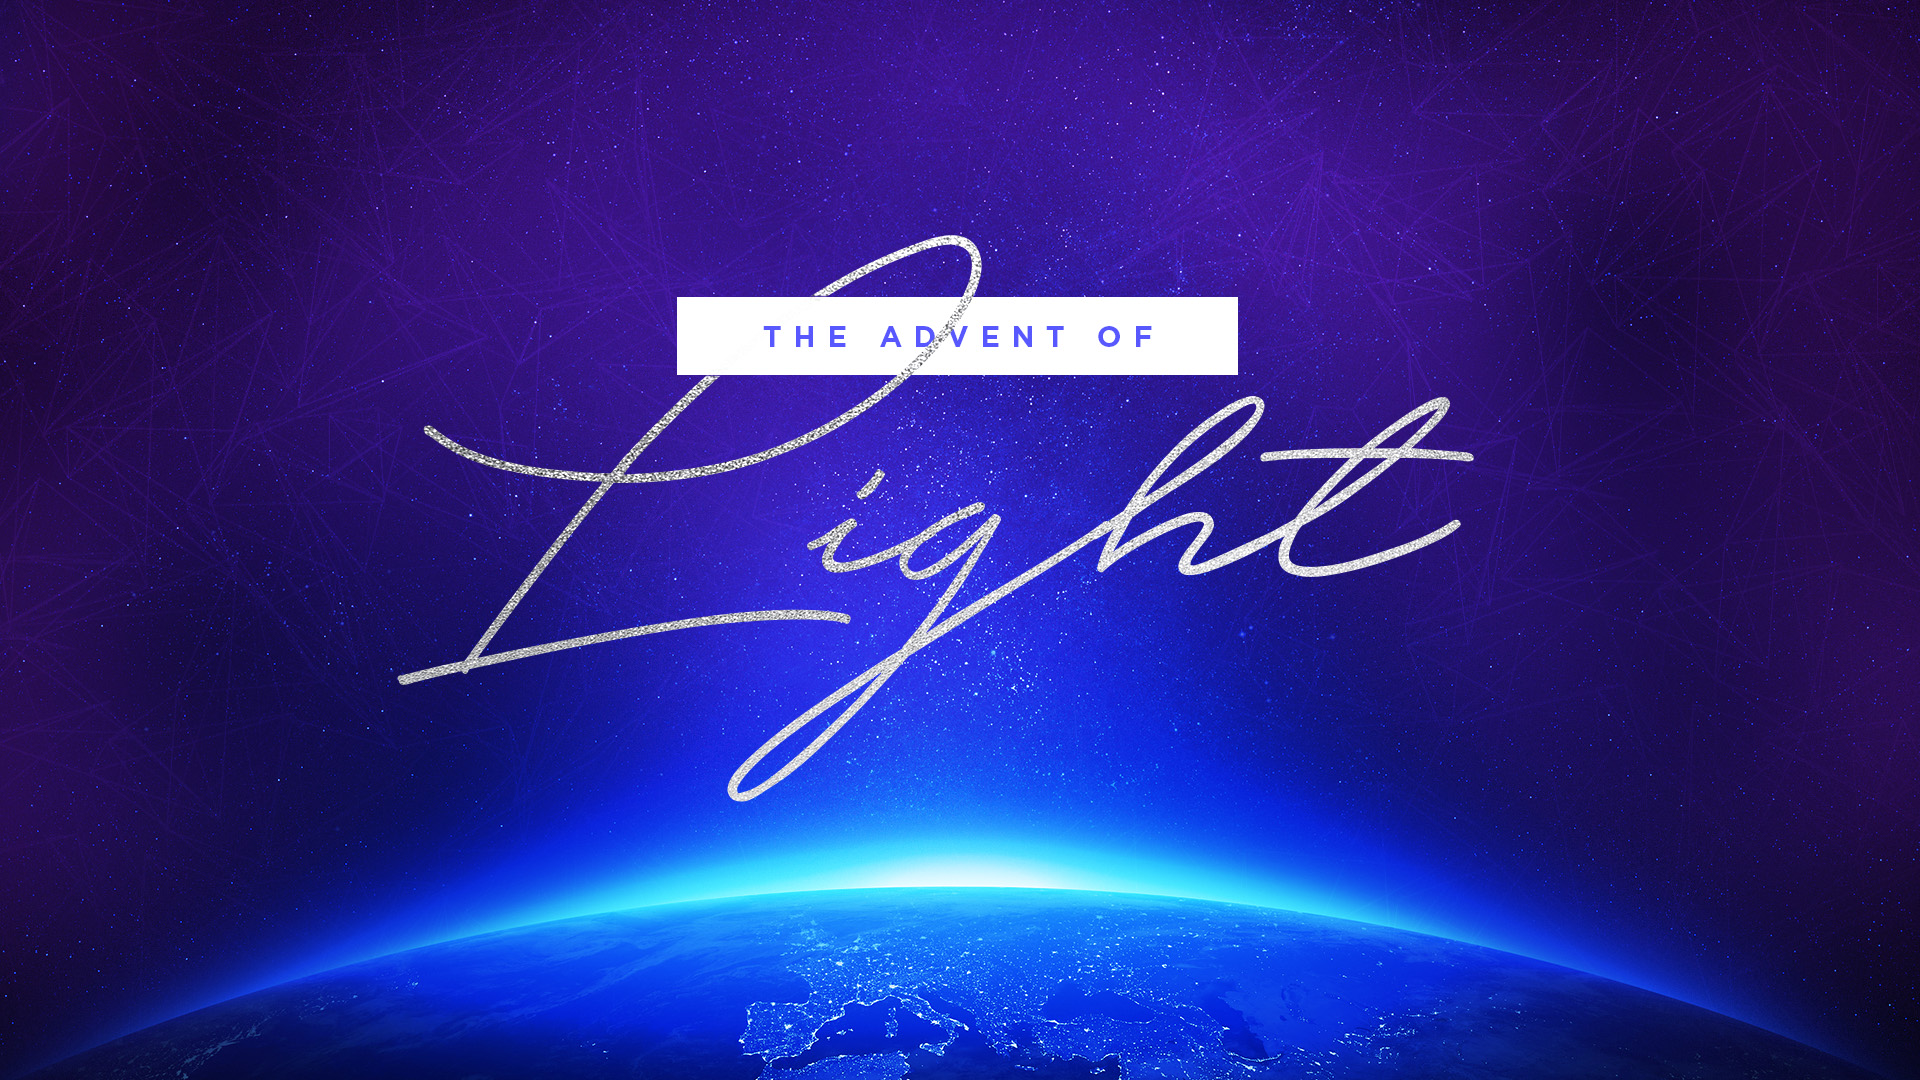 The Advent of Light